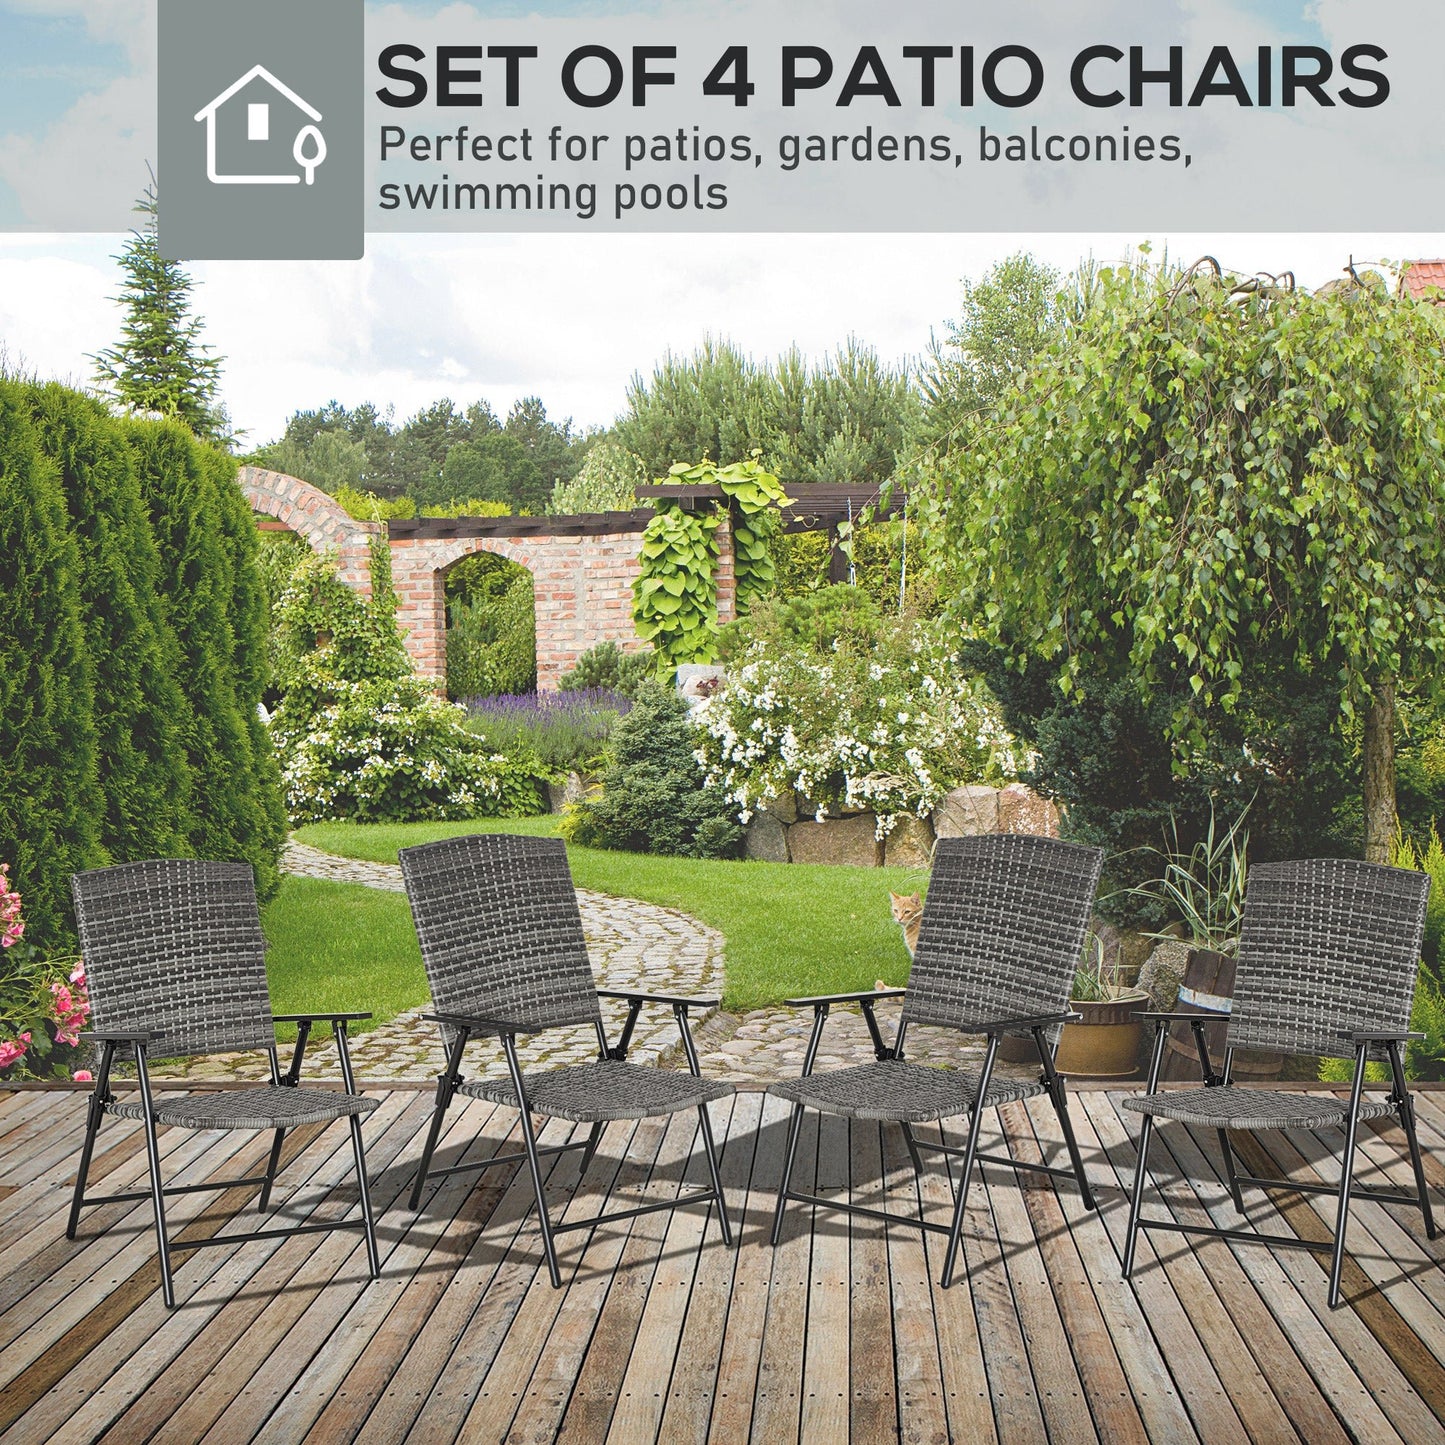 Outdoor and Garden-Wicker Patio Dining Chair Set of 4 with Folding Design, Outdoor Rattan Sling Chair Lawn Chair Set for Backyard Wedding Party, Mixed Grey - Outdoor Style Company